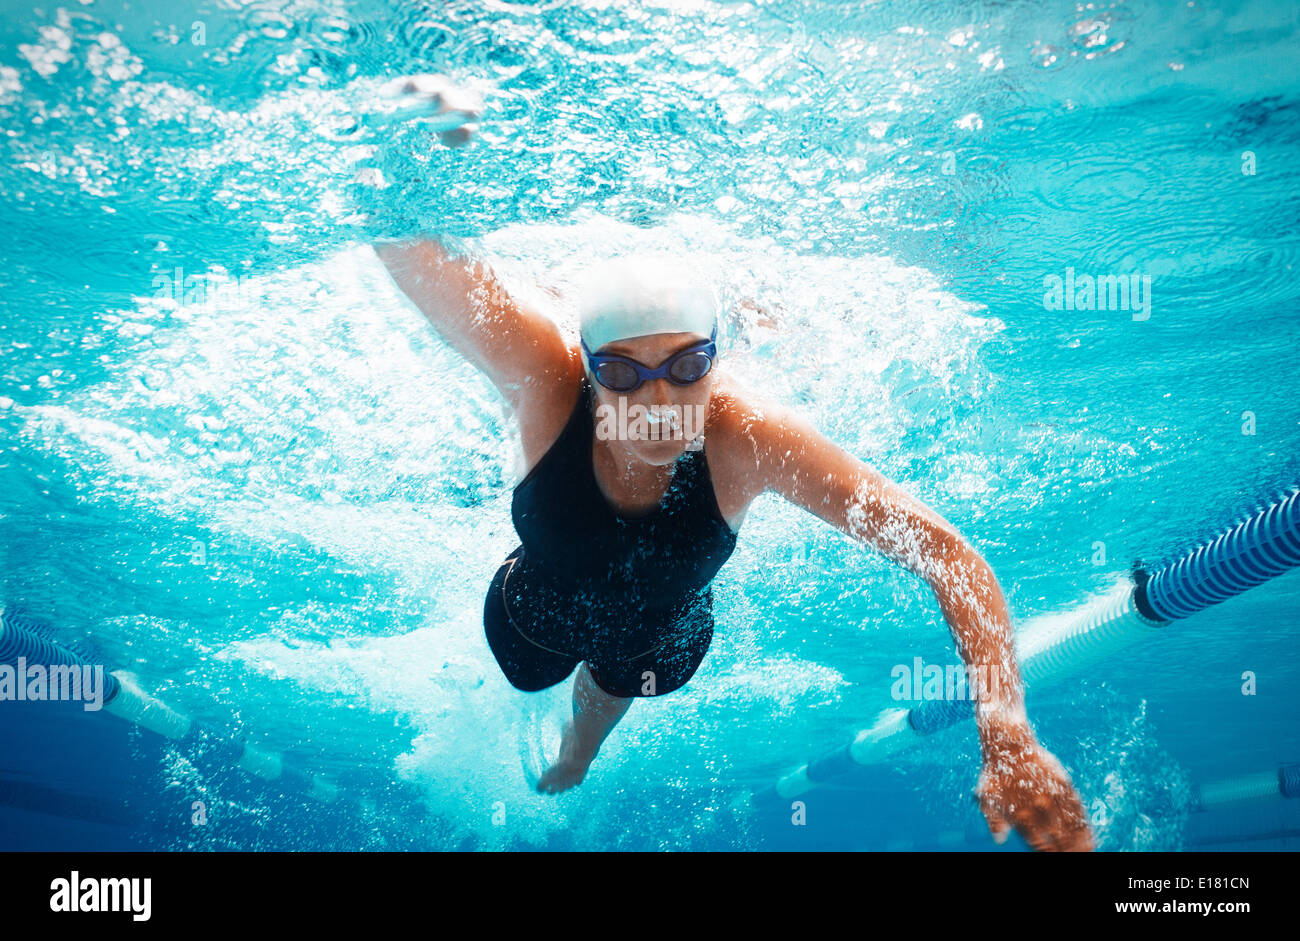 Swimmer racing in pool Banque D'Images